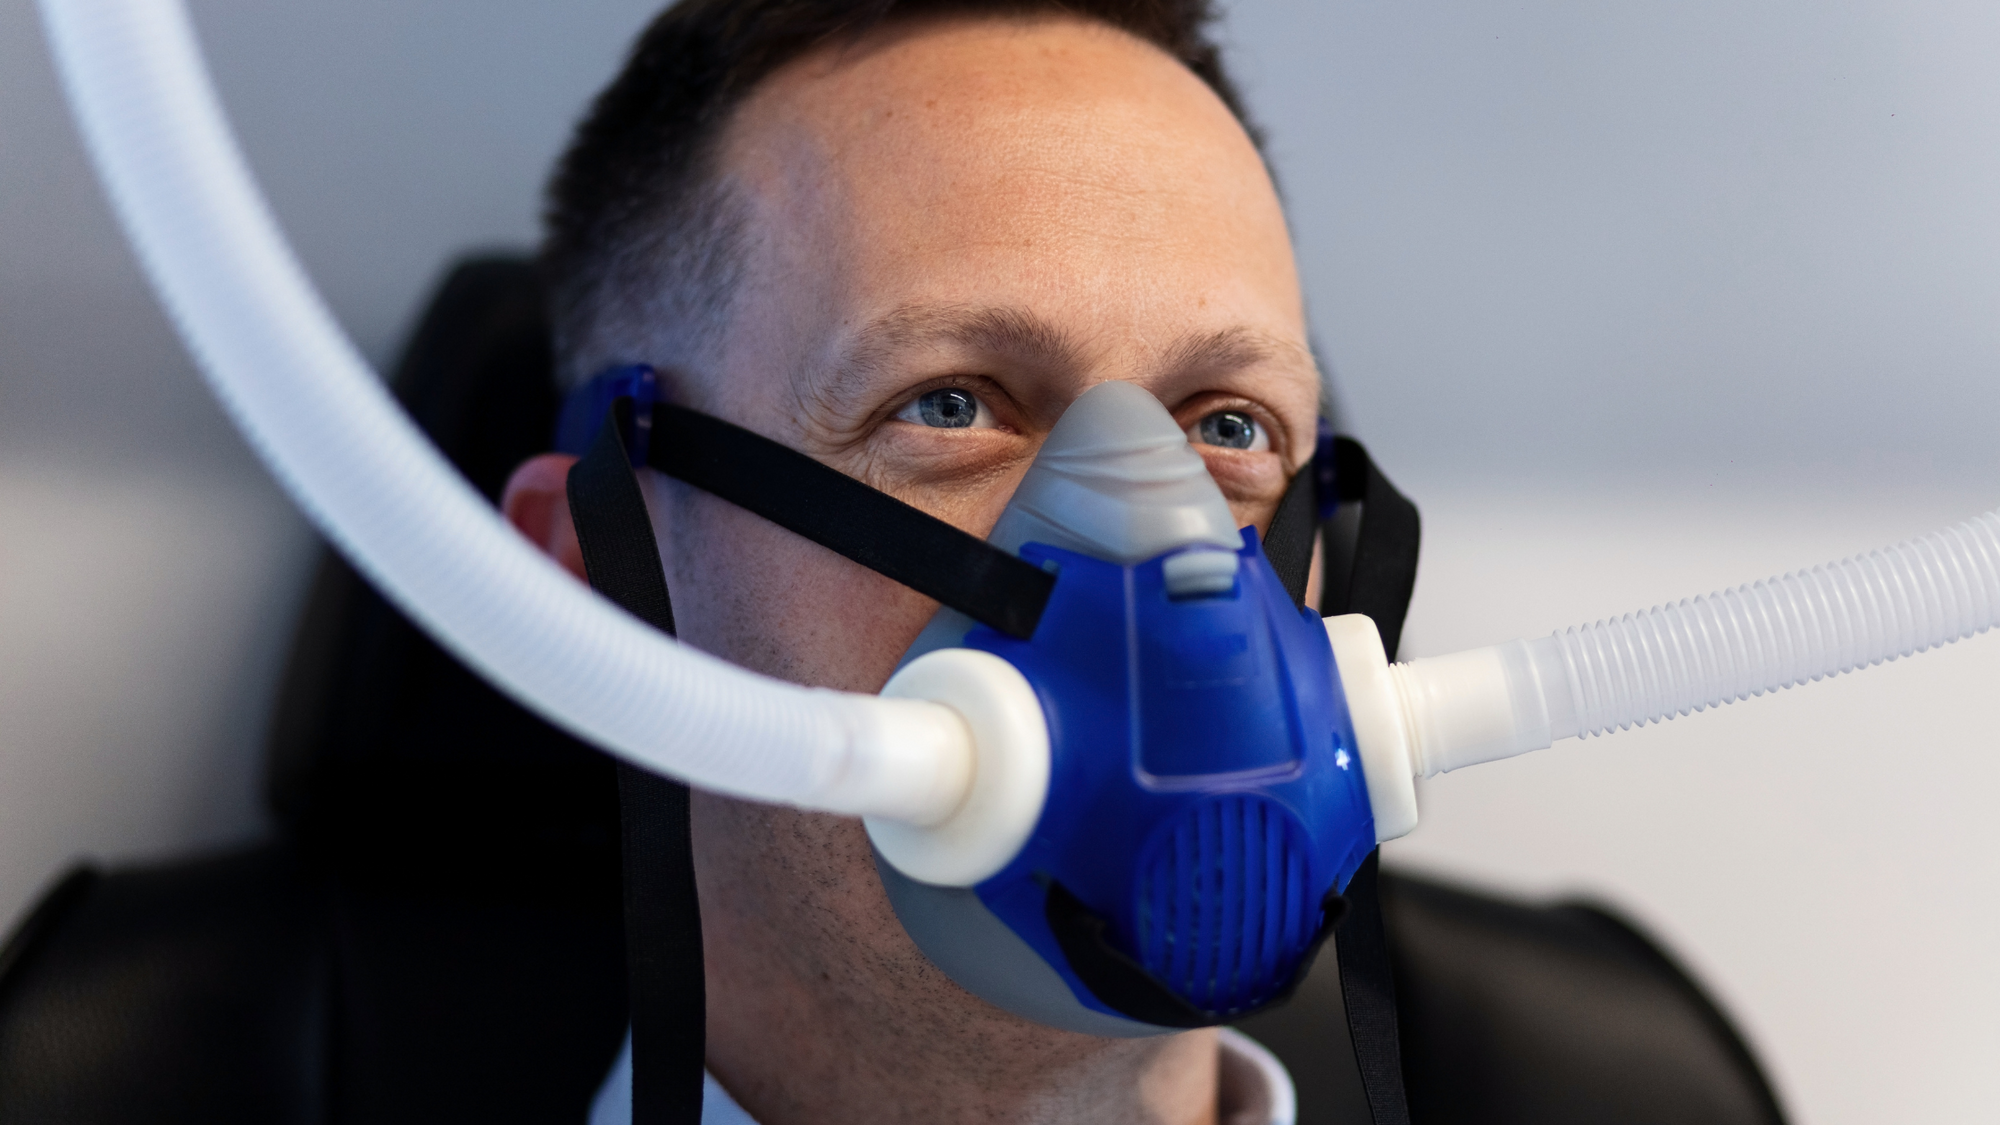 Oxygen Therapy - What Is It And How Does It Work?